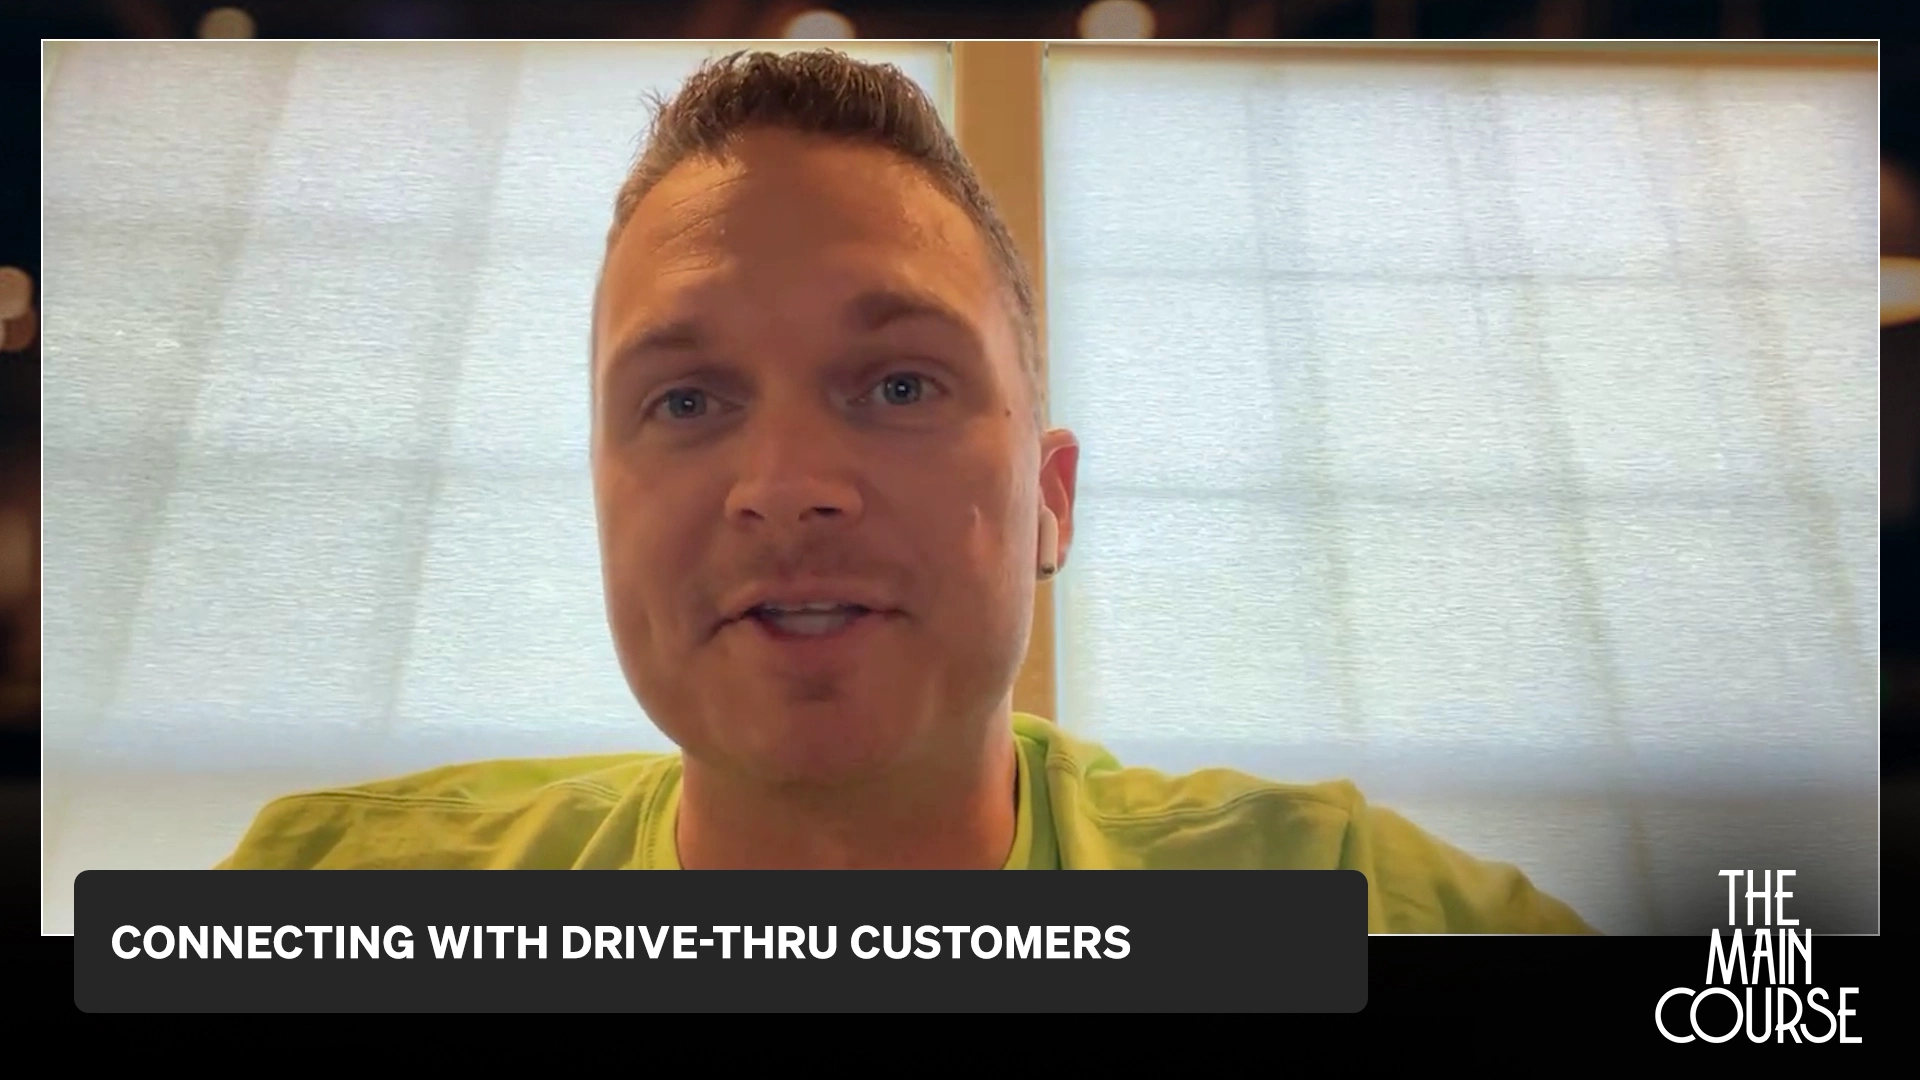 The Main Course: How A New Drive-Thru Experience Keeps Coffee Customer-Centric